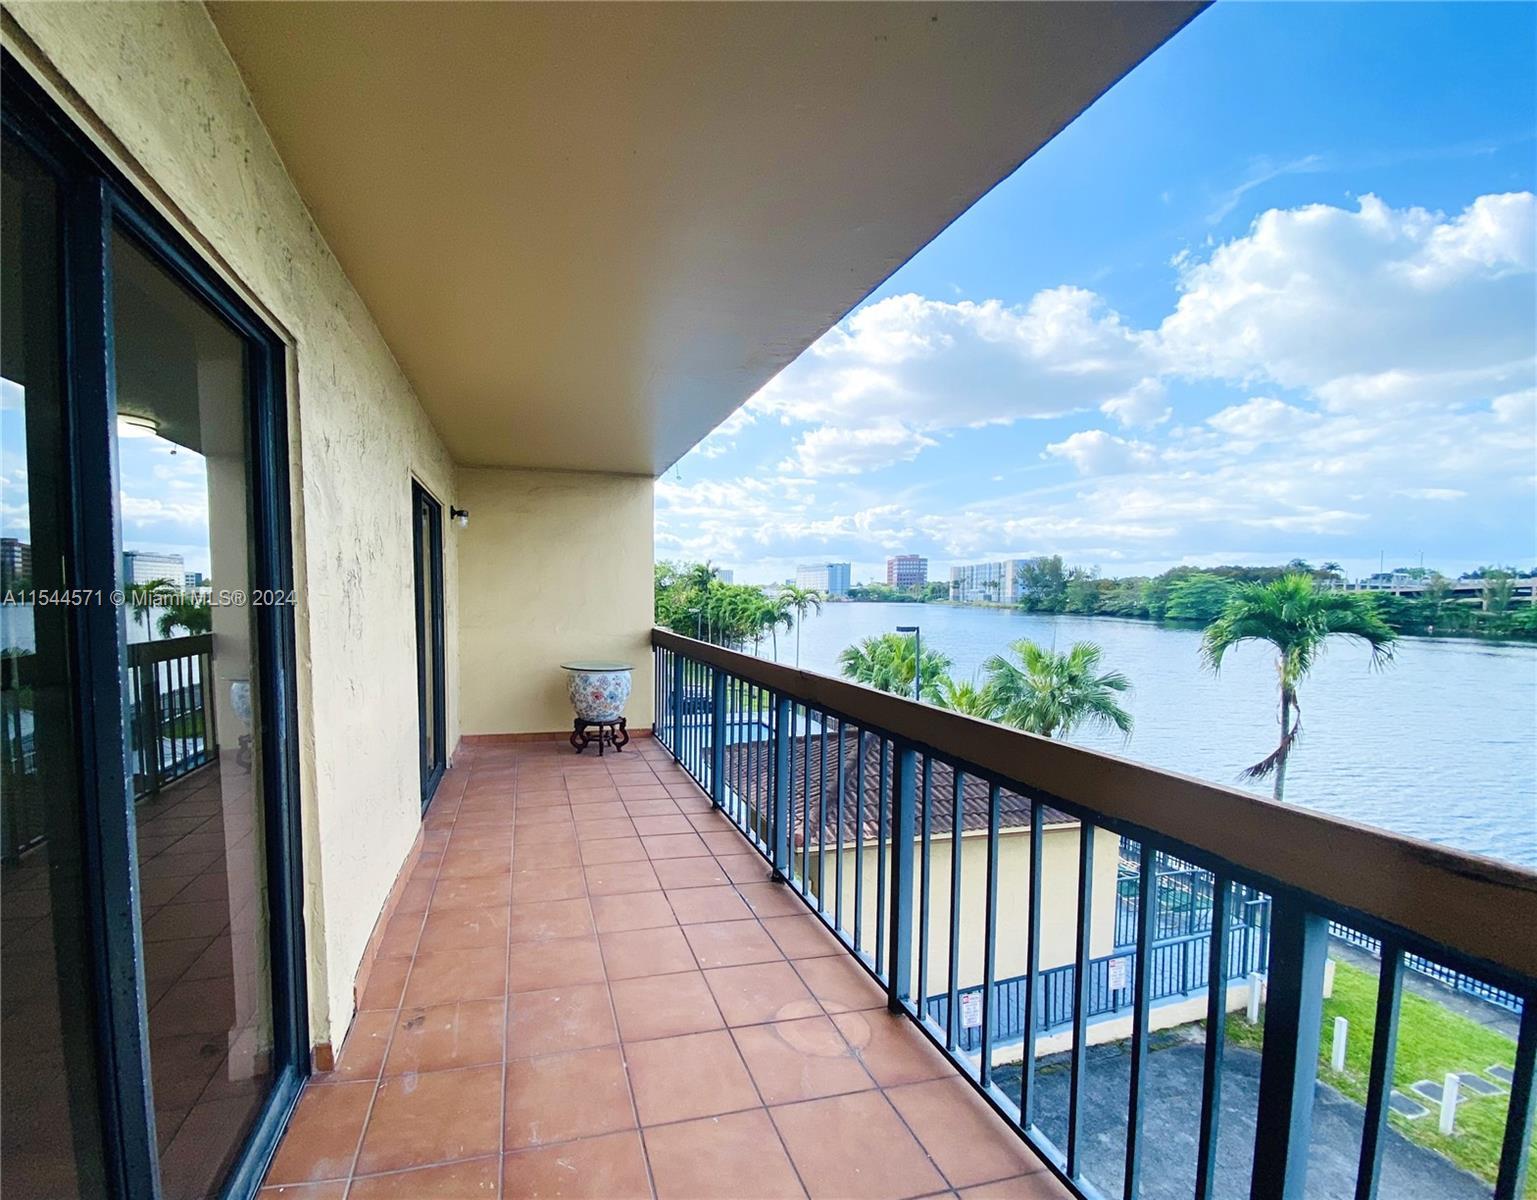 Photo of 5249 NW 7th St #219 in Miami, FL